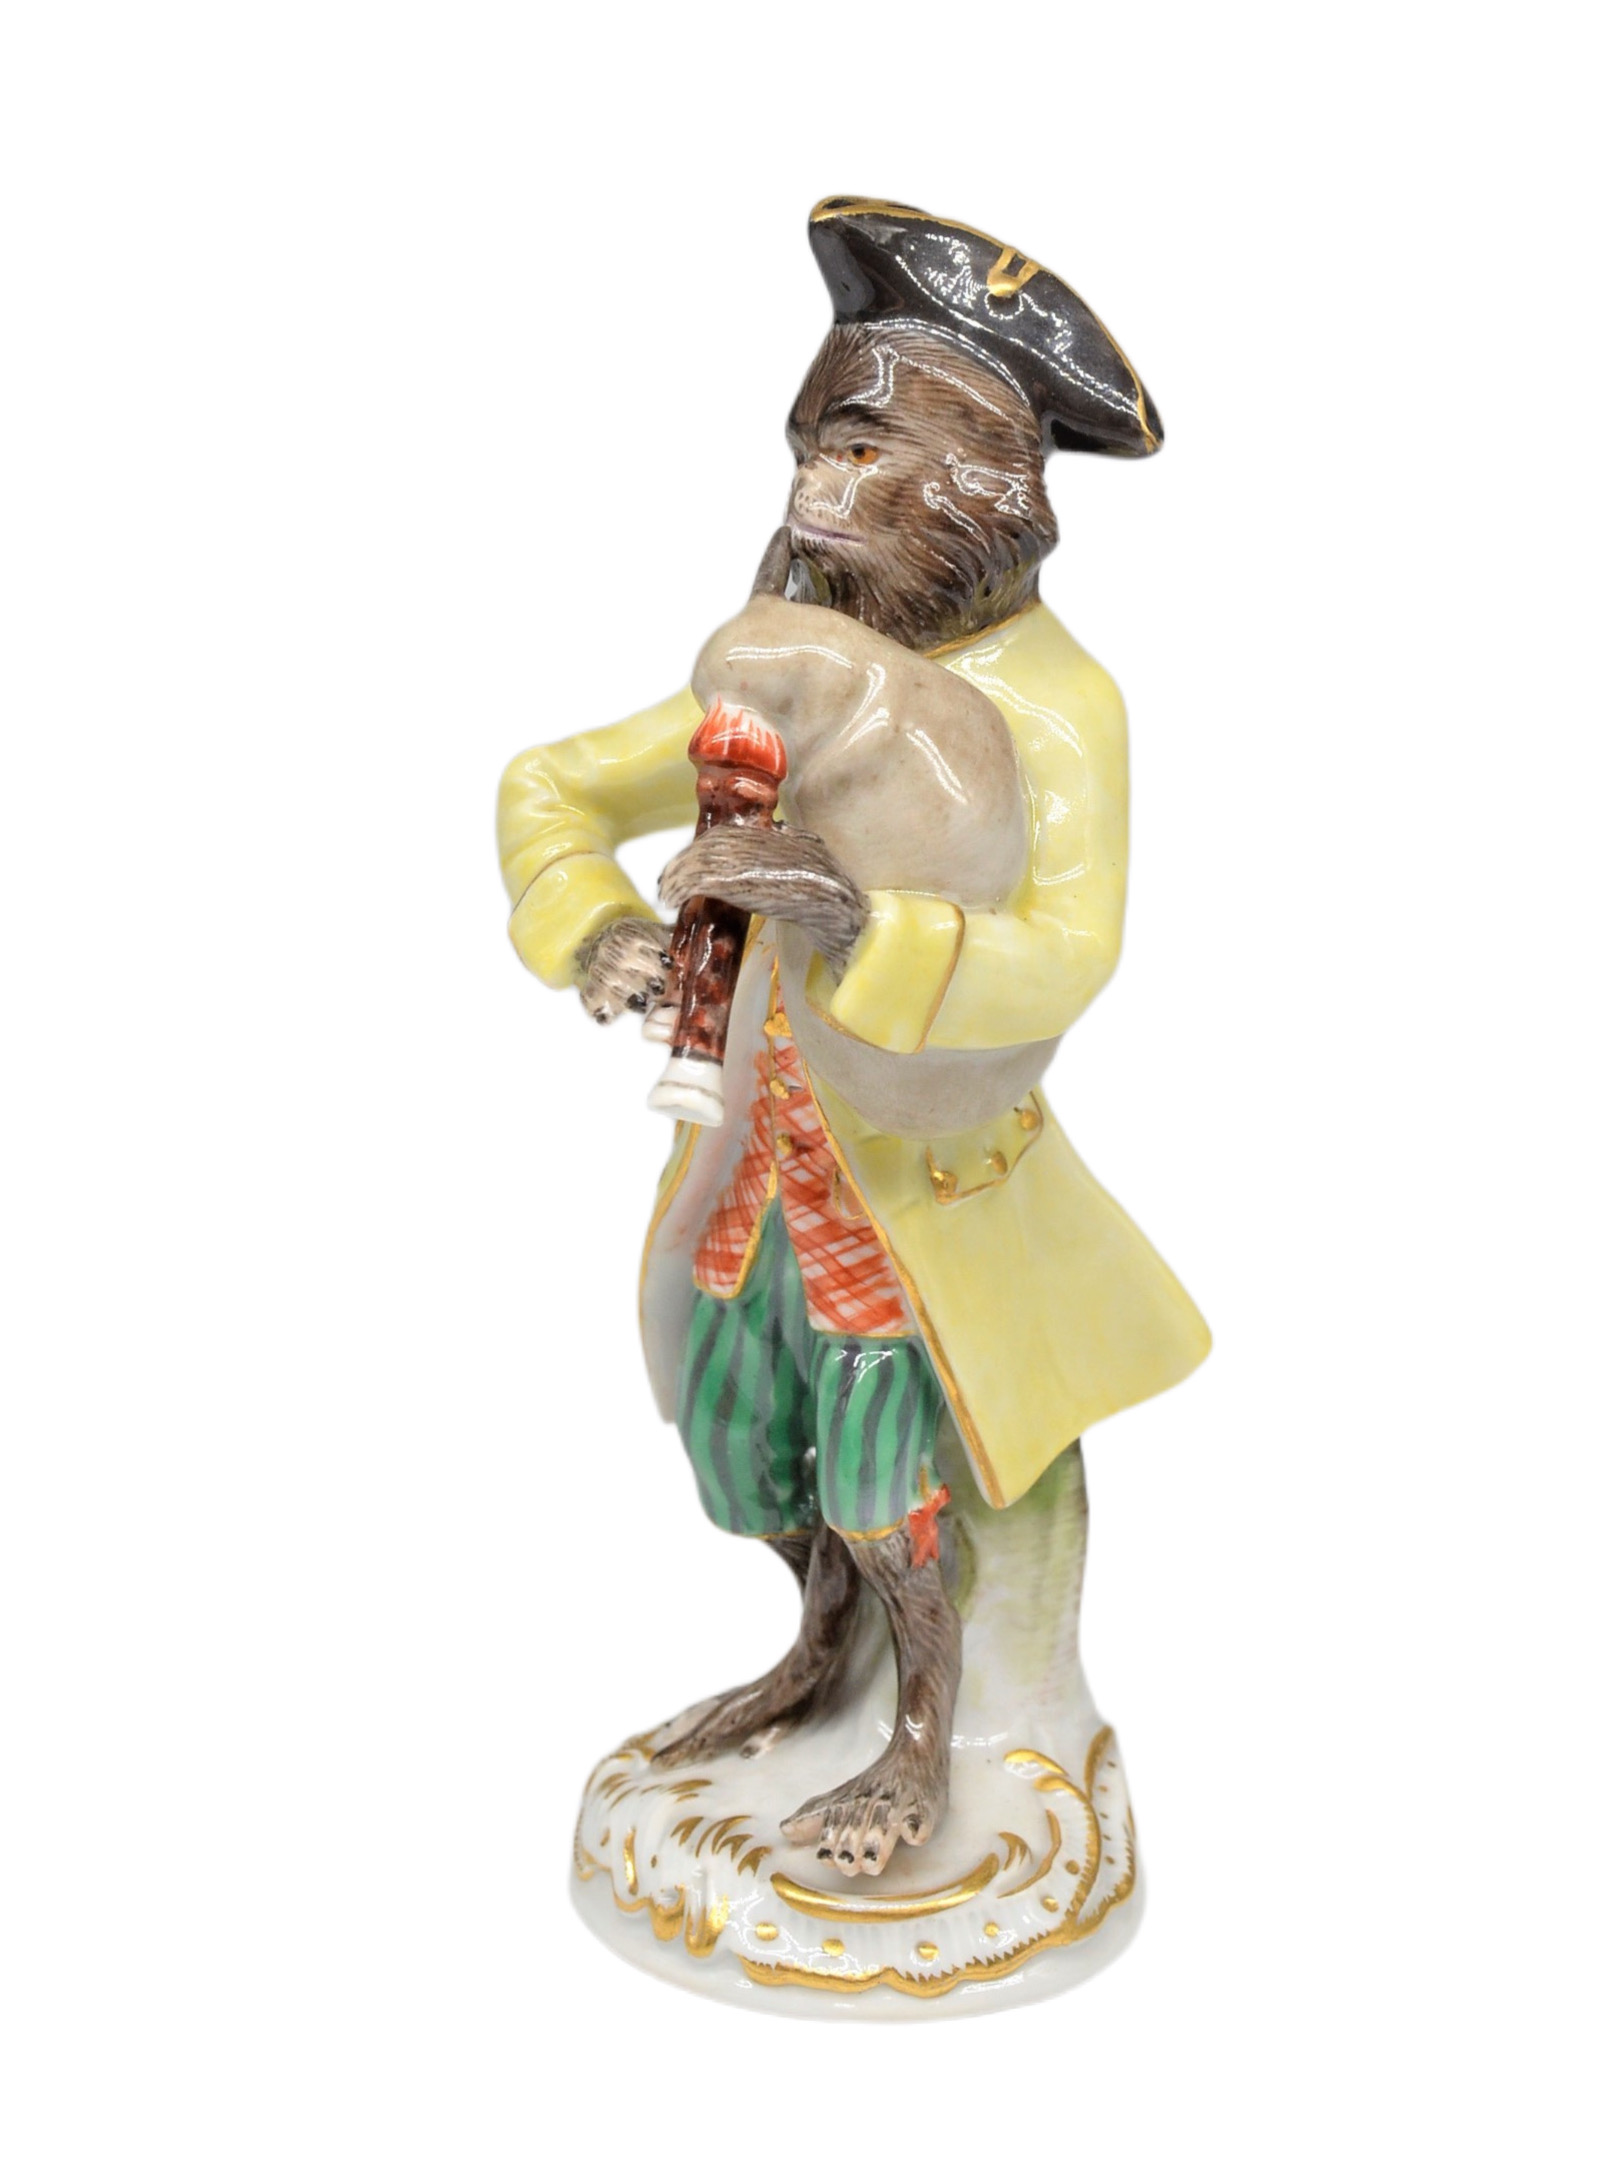 'Bagpiper' figurine from 'Monkey Orchestra' 2